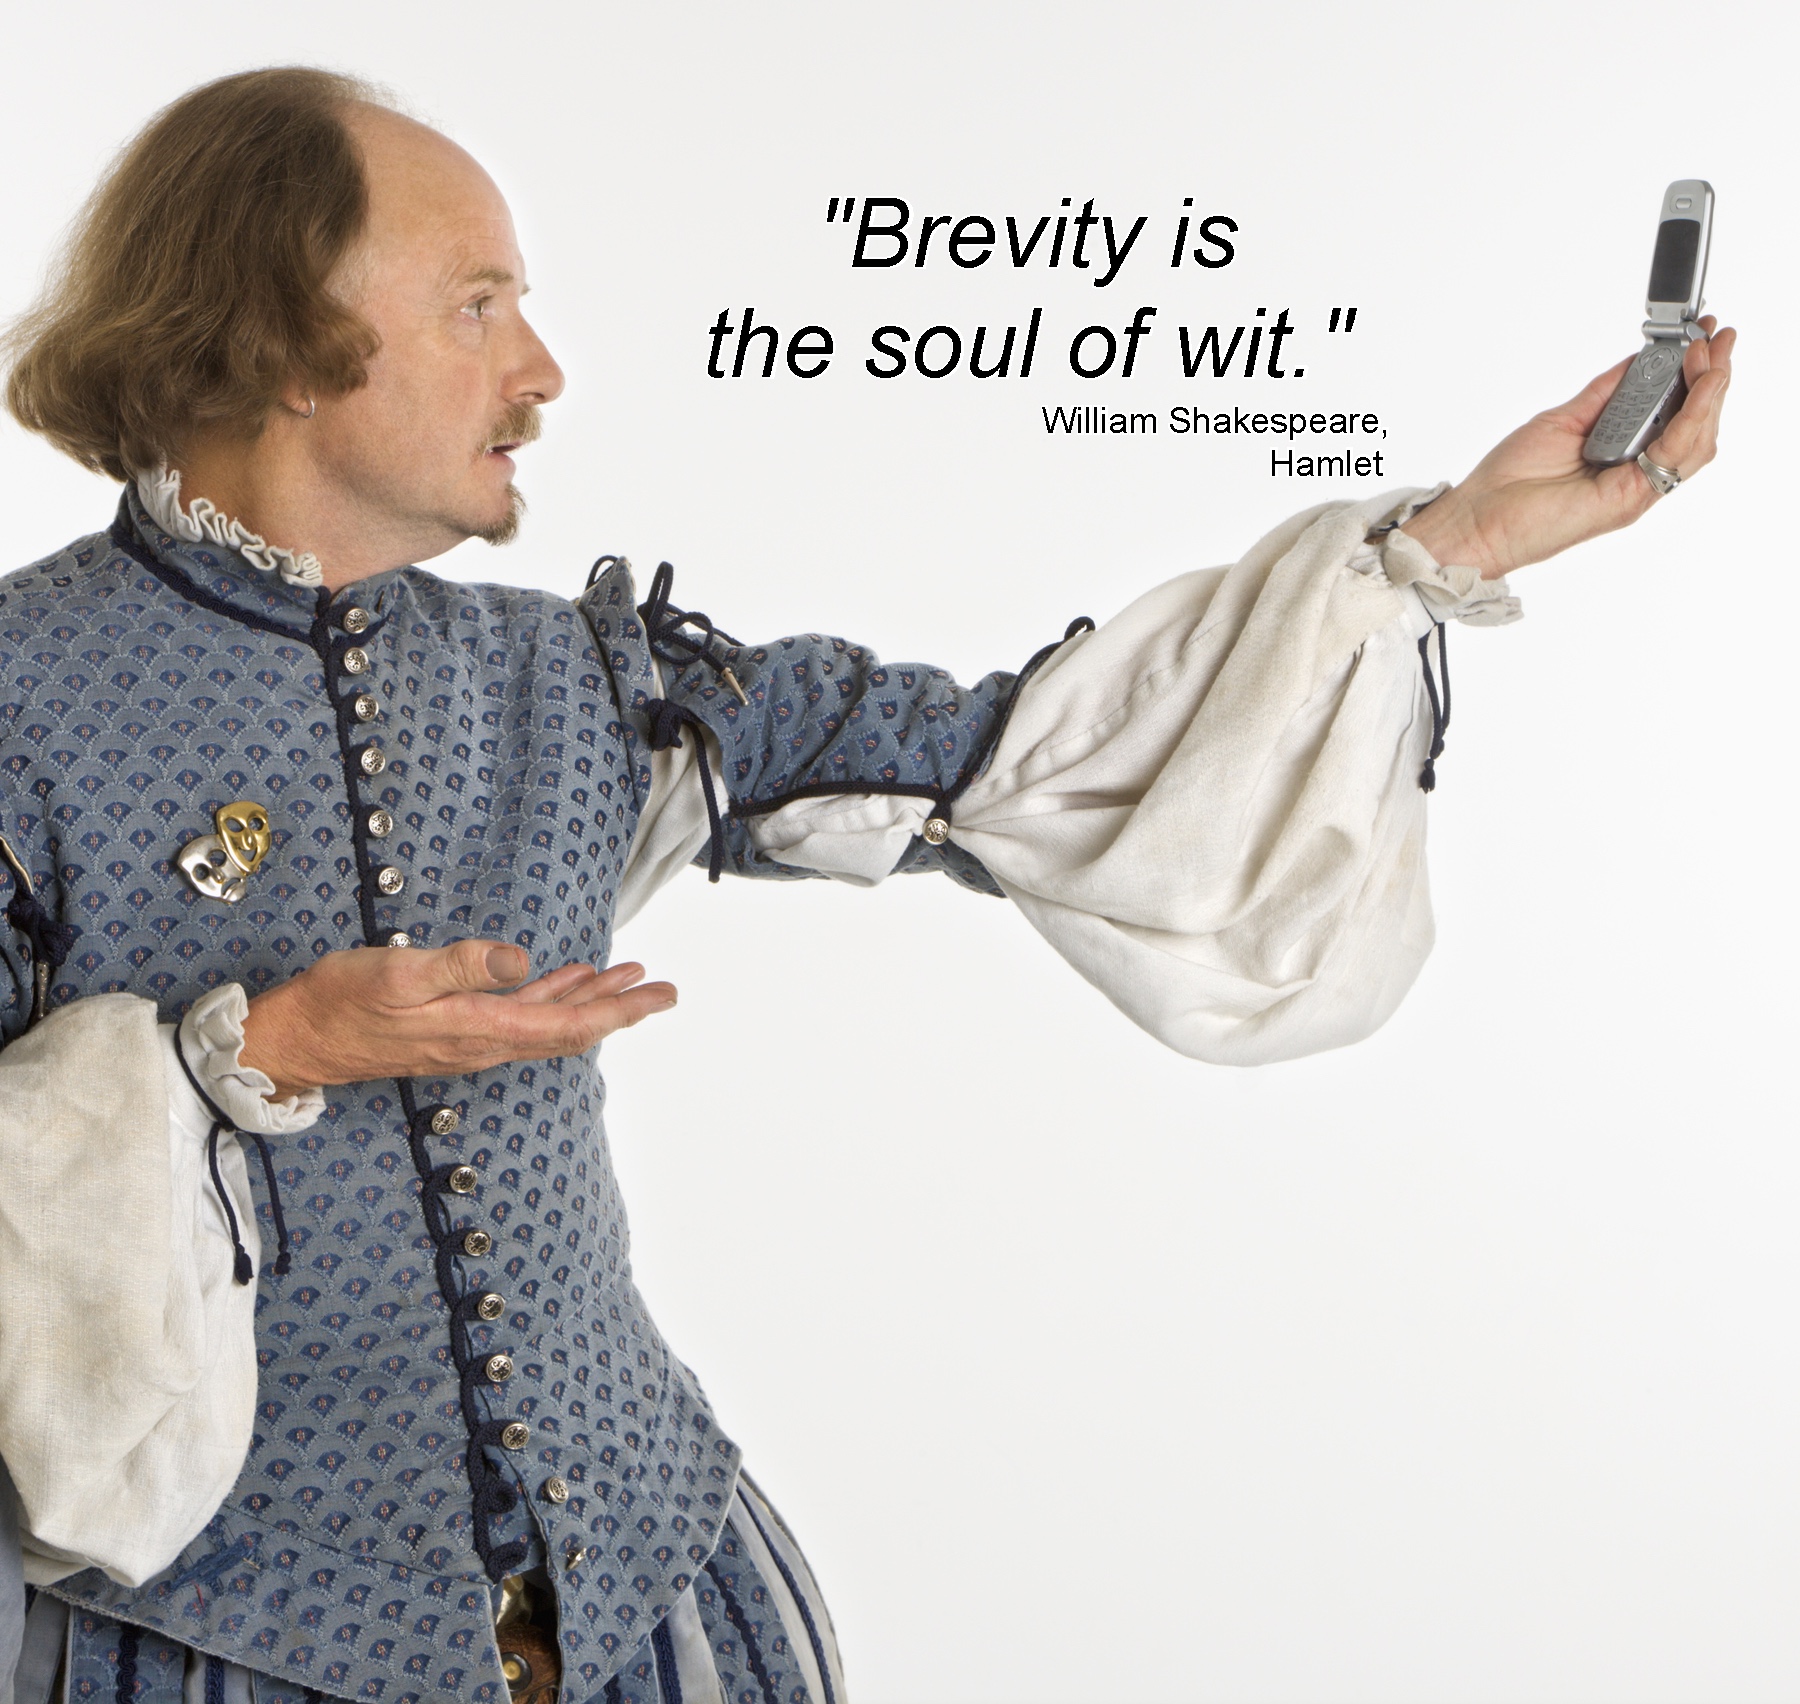 Actor with cell phone and Shakespeare quote about brevity being the soul of wit